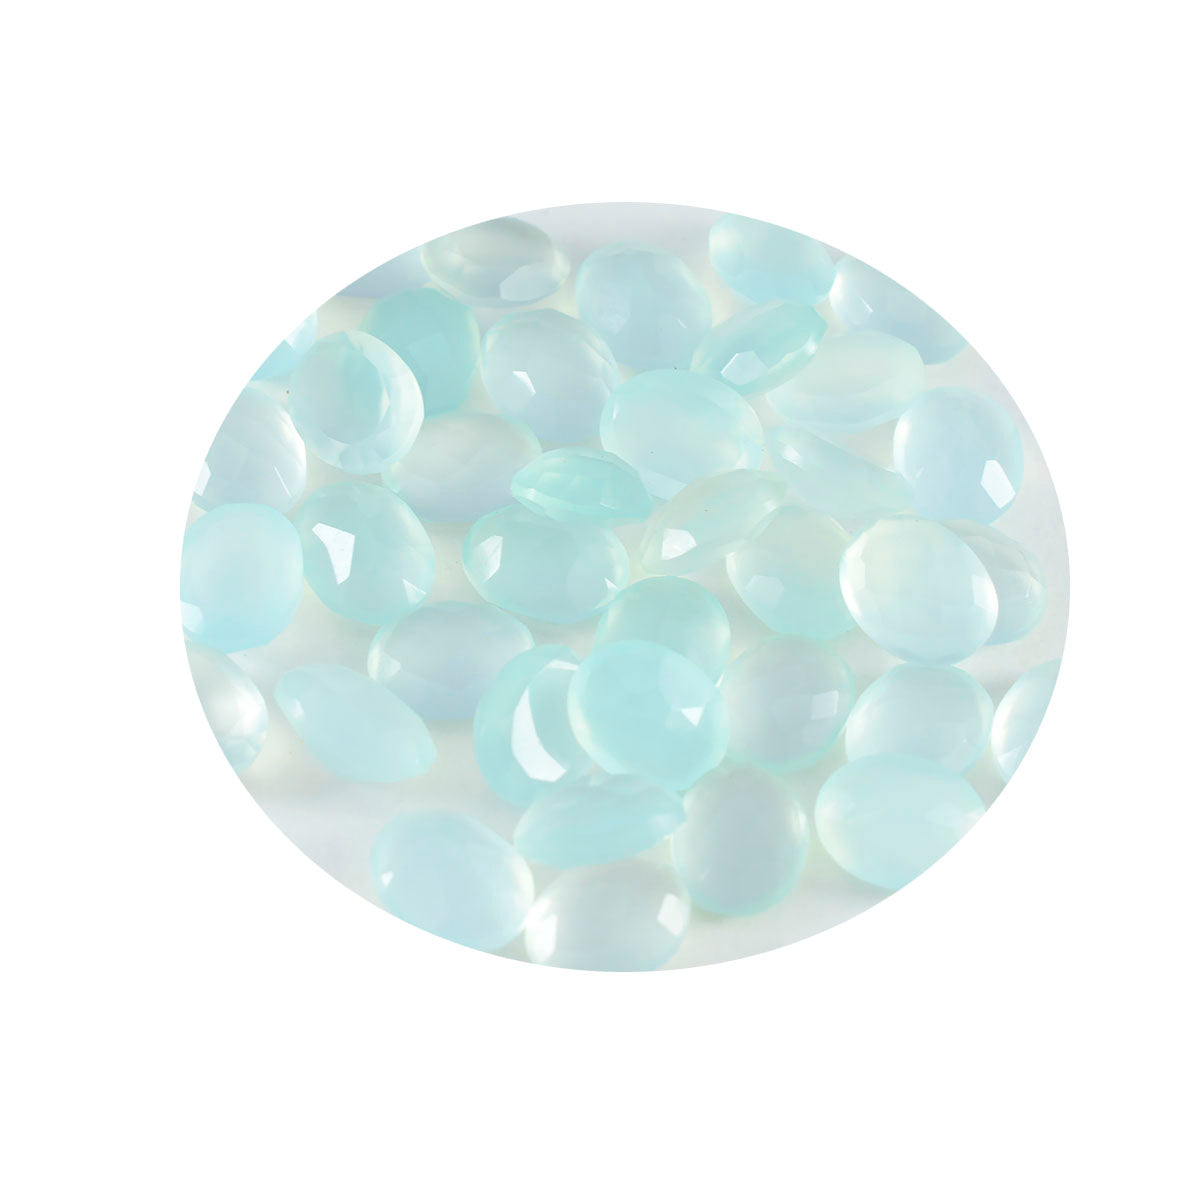 Riyogems 1PC Genuine Aqua Chalcedony Faceted 3x5 mm Oval Shape attractive Quality Loose Stone